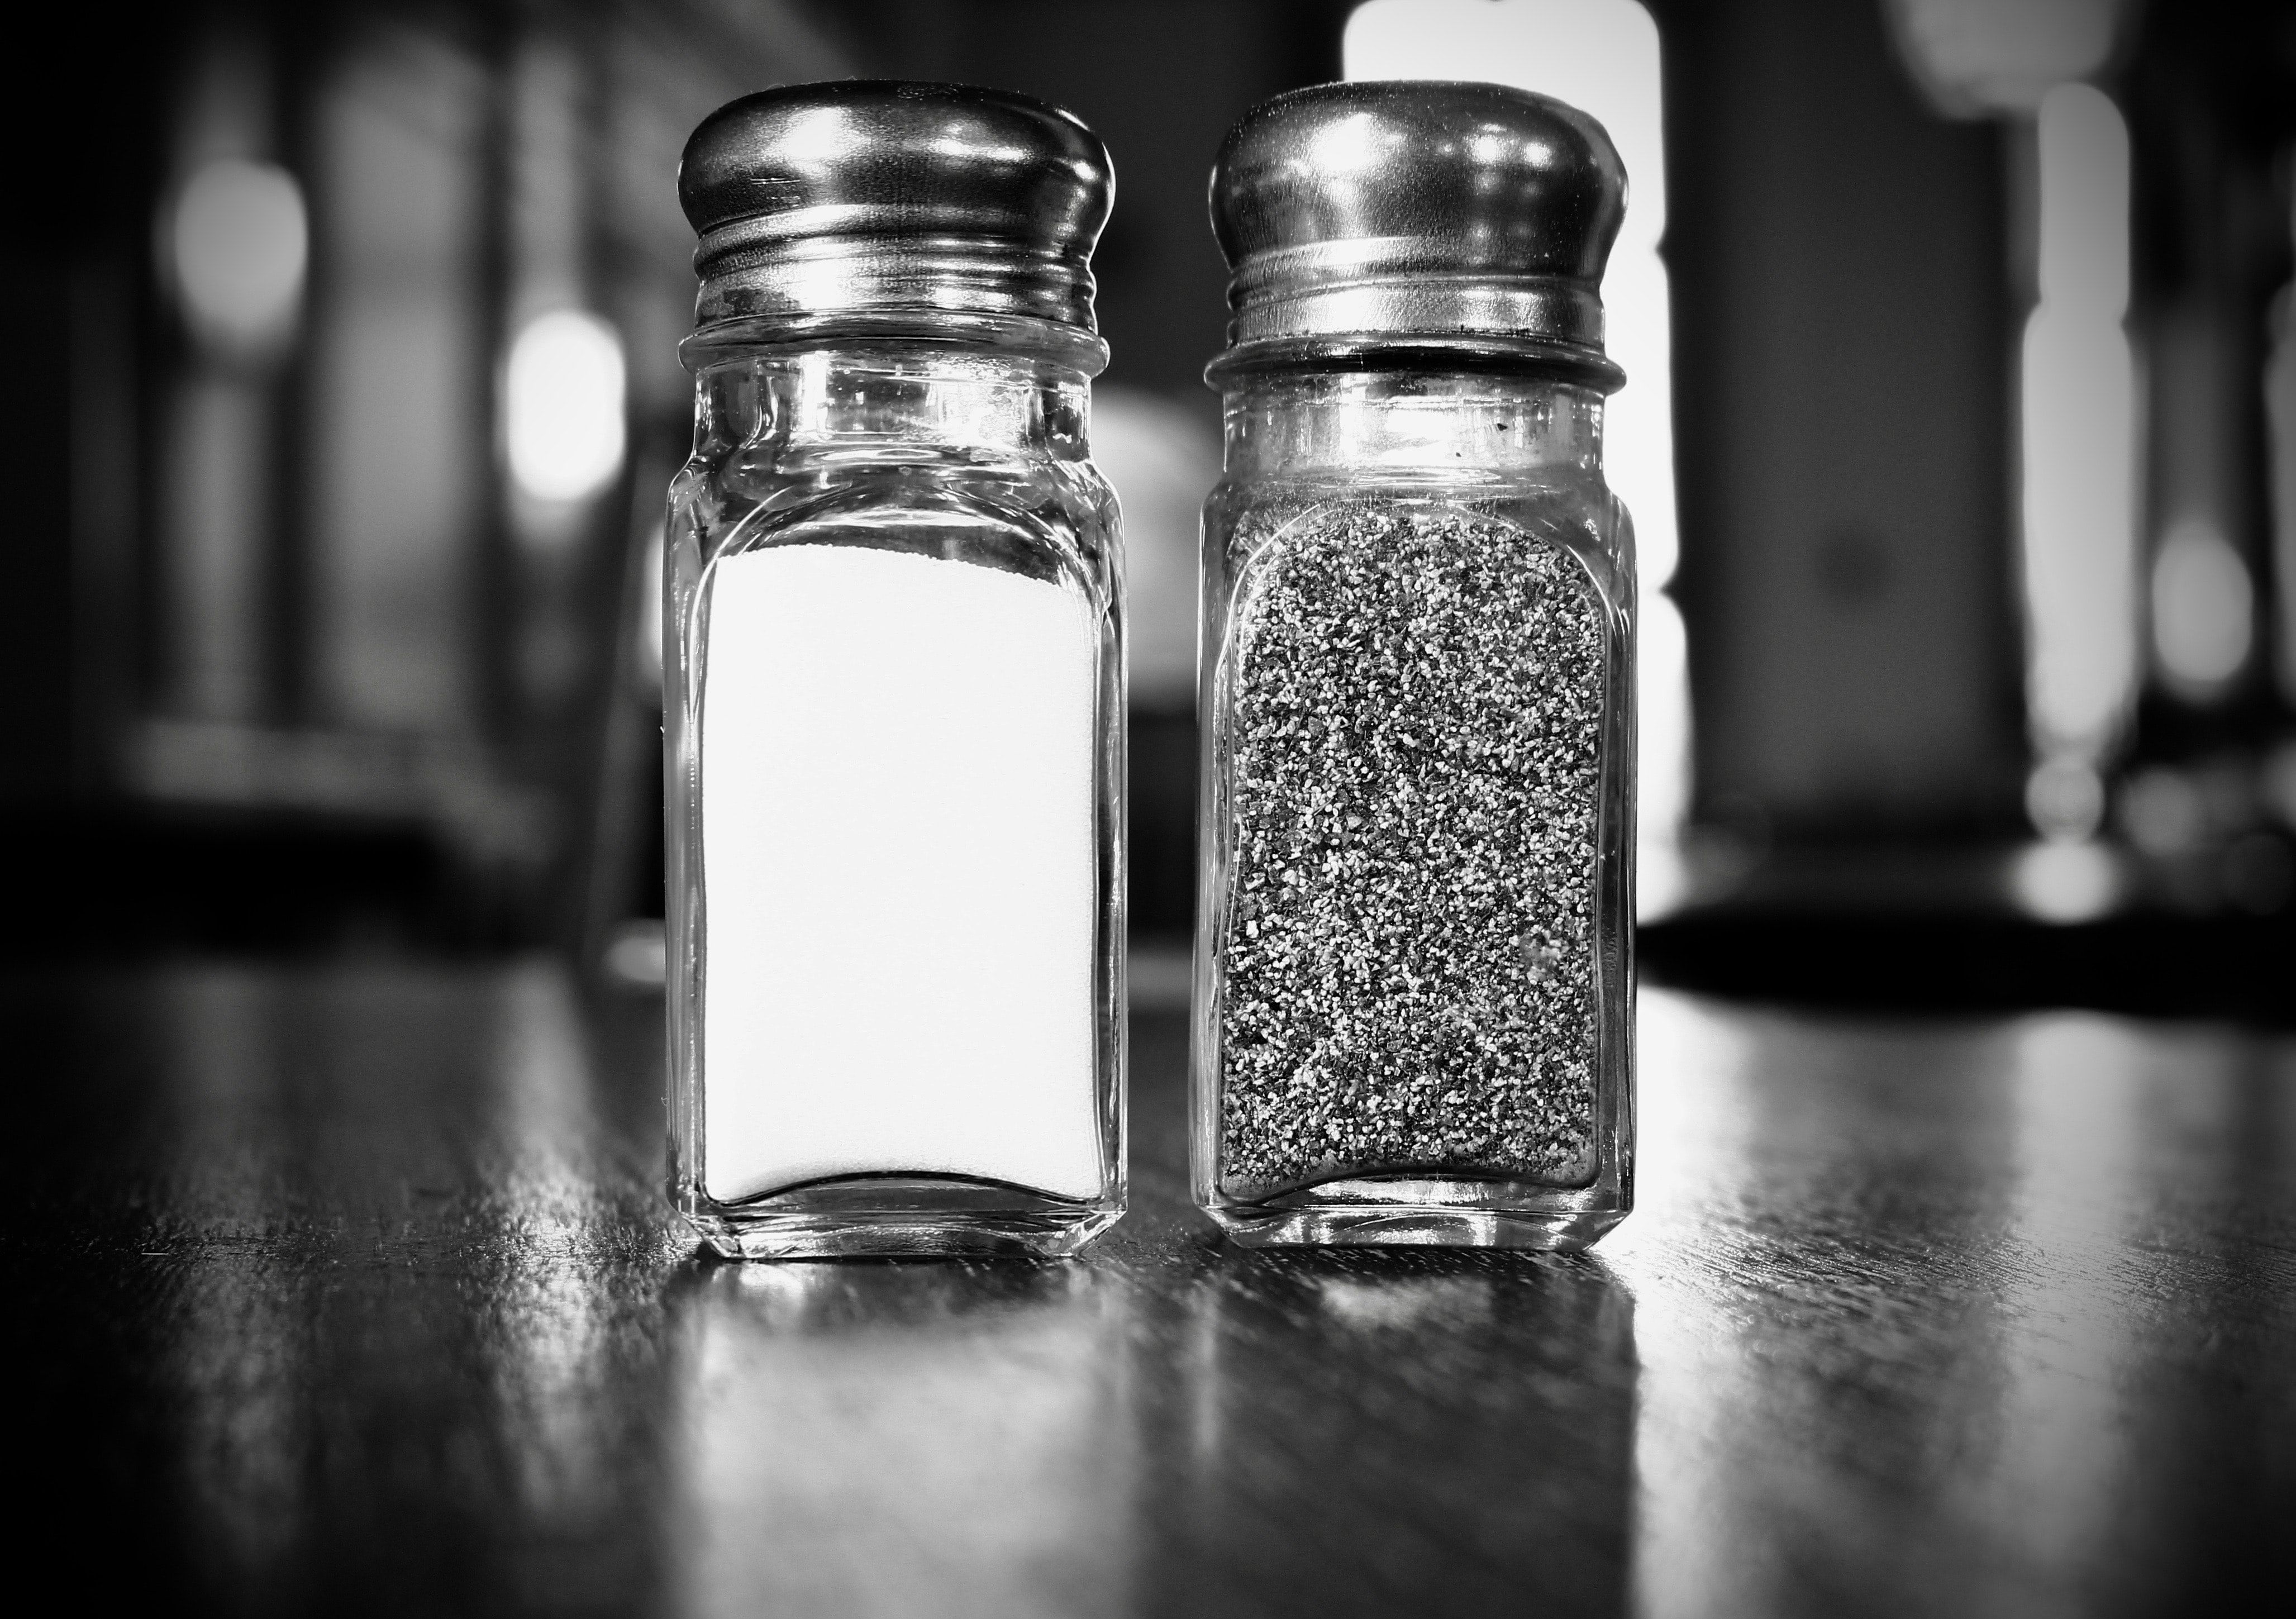 salt and pepper shakers contrast authentication and authorization